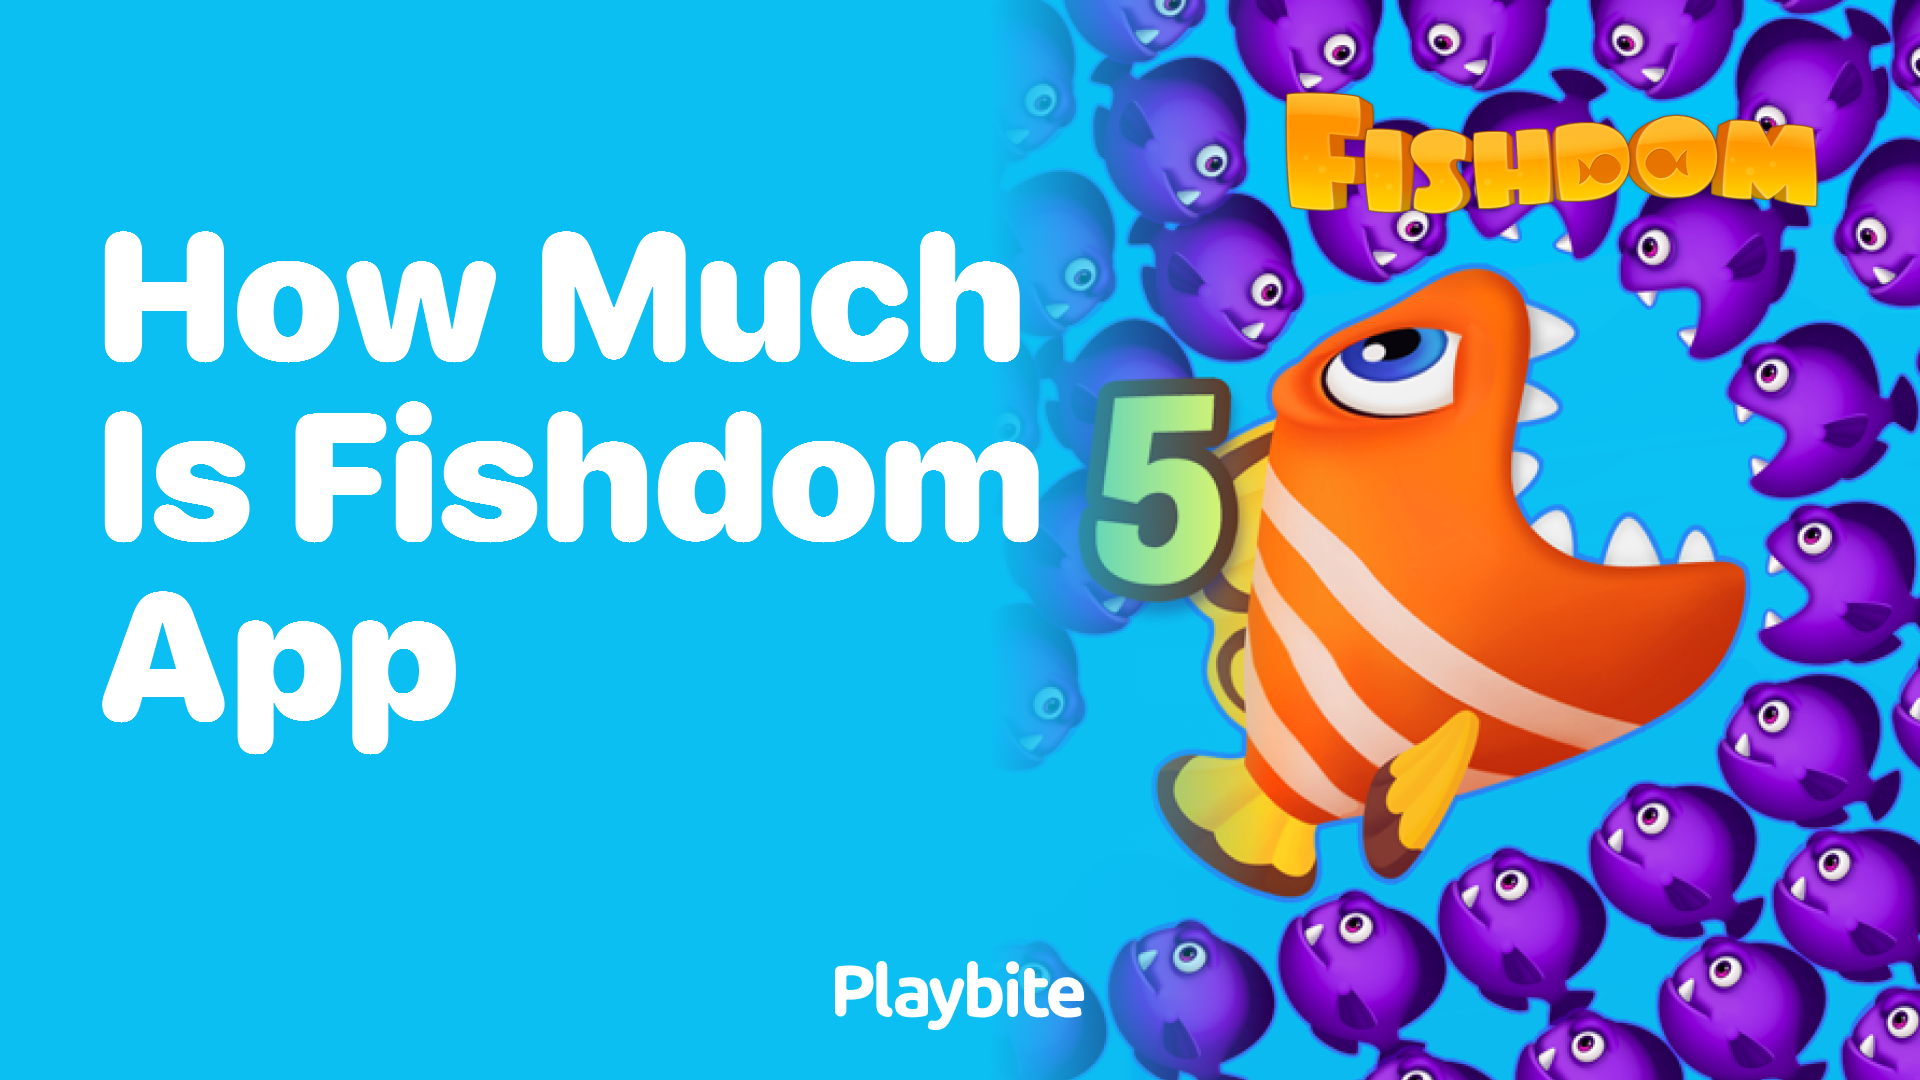 How Much Does the Fishdom App Cost?